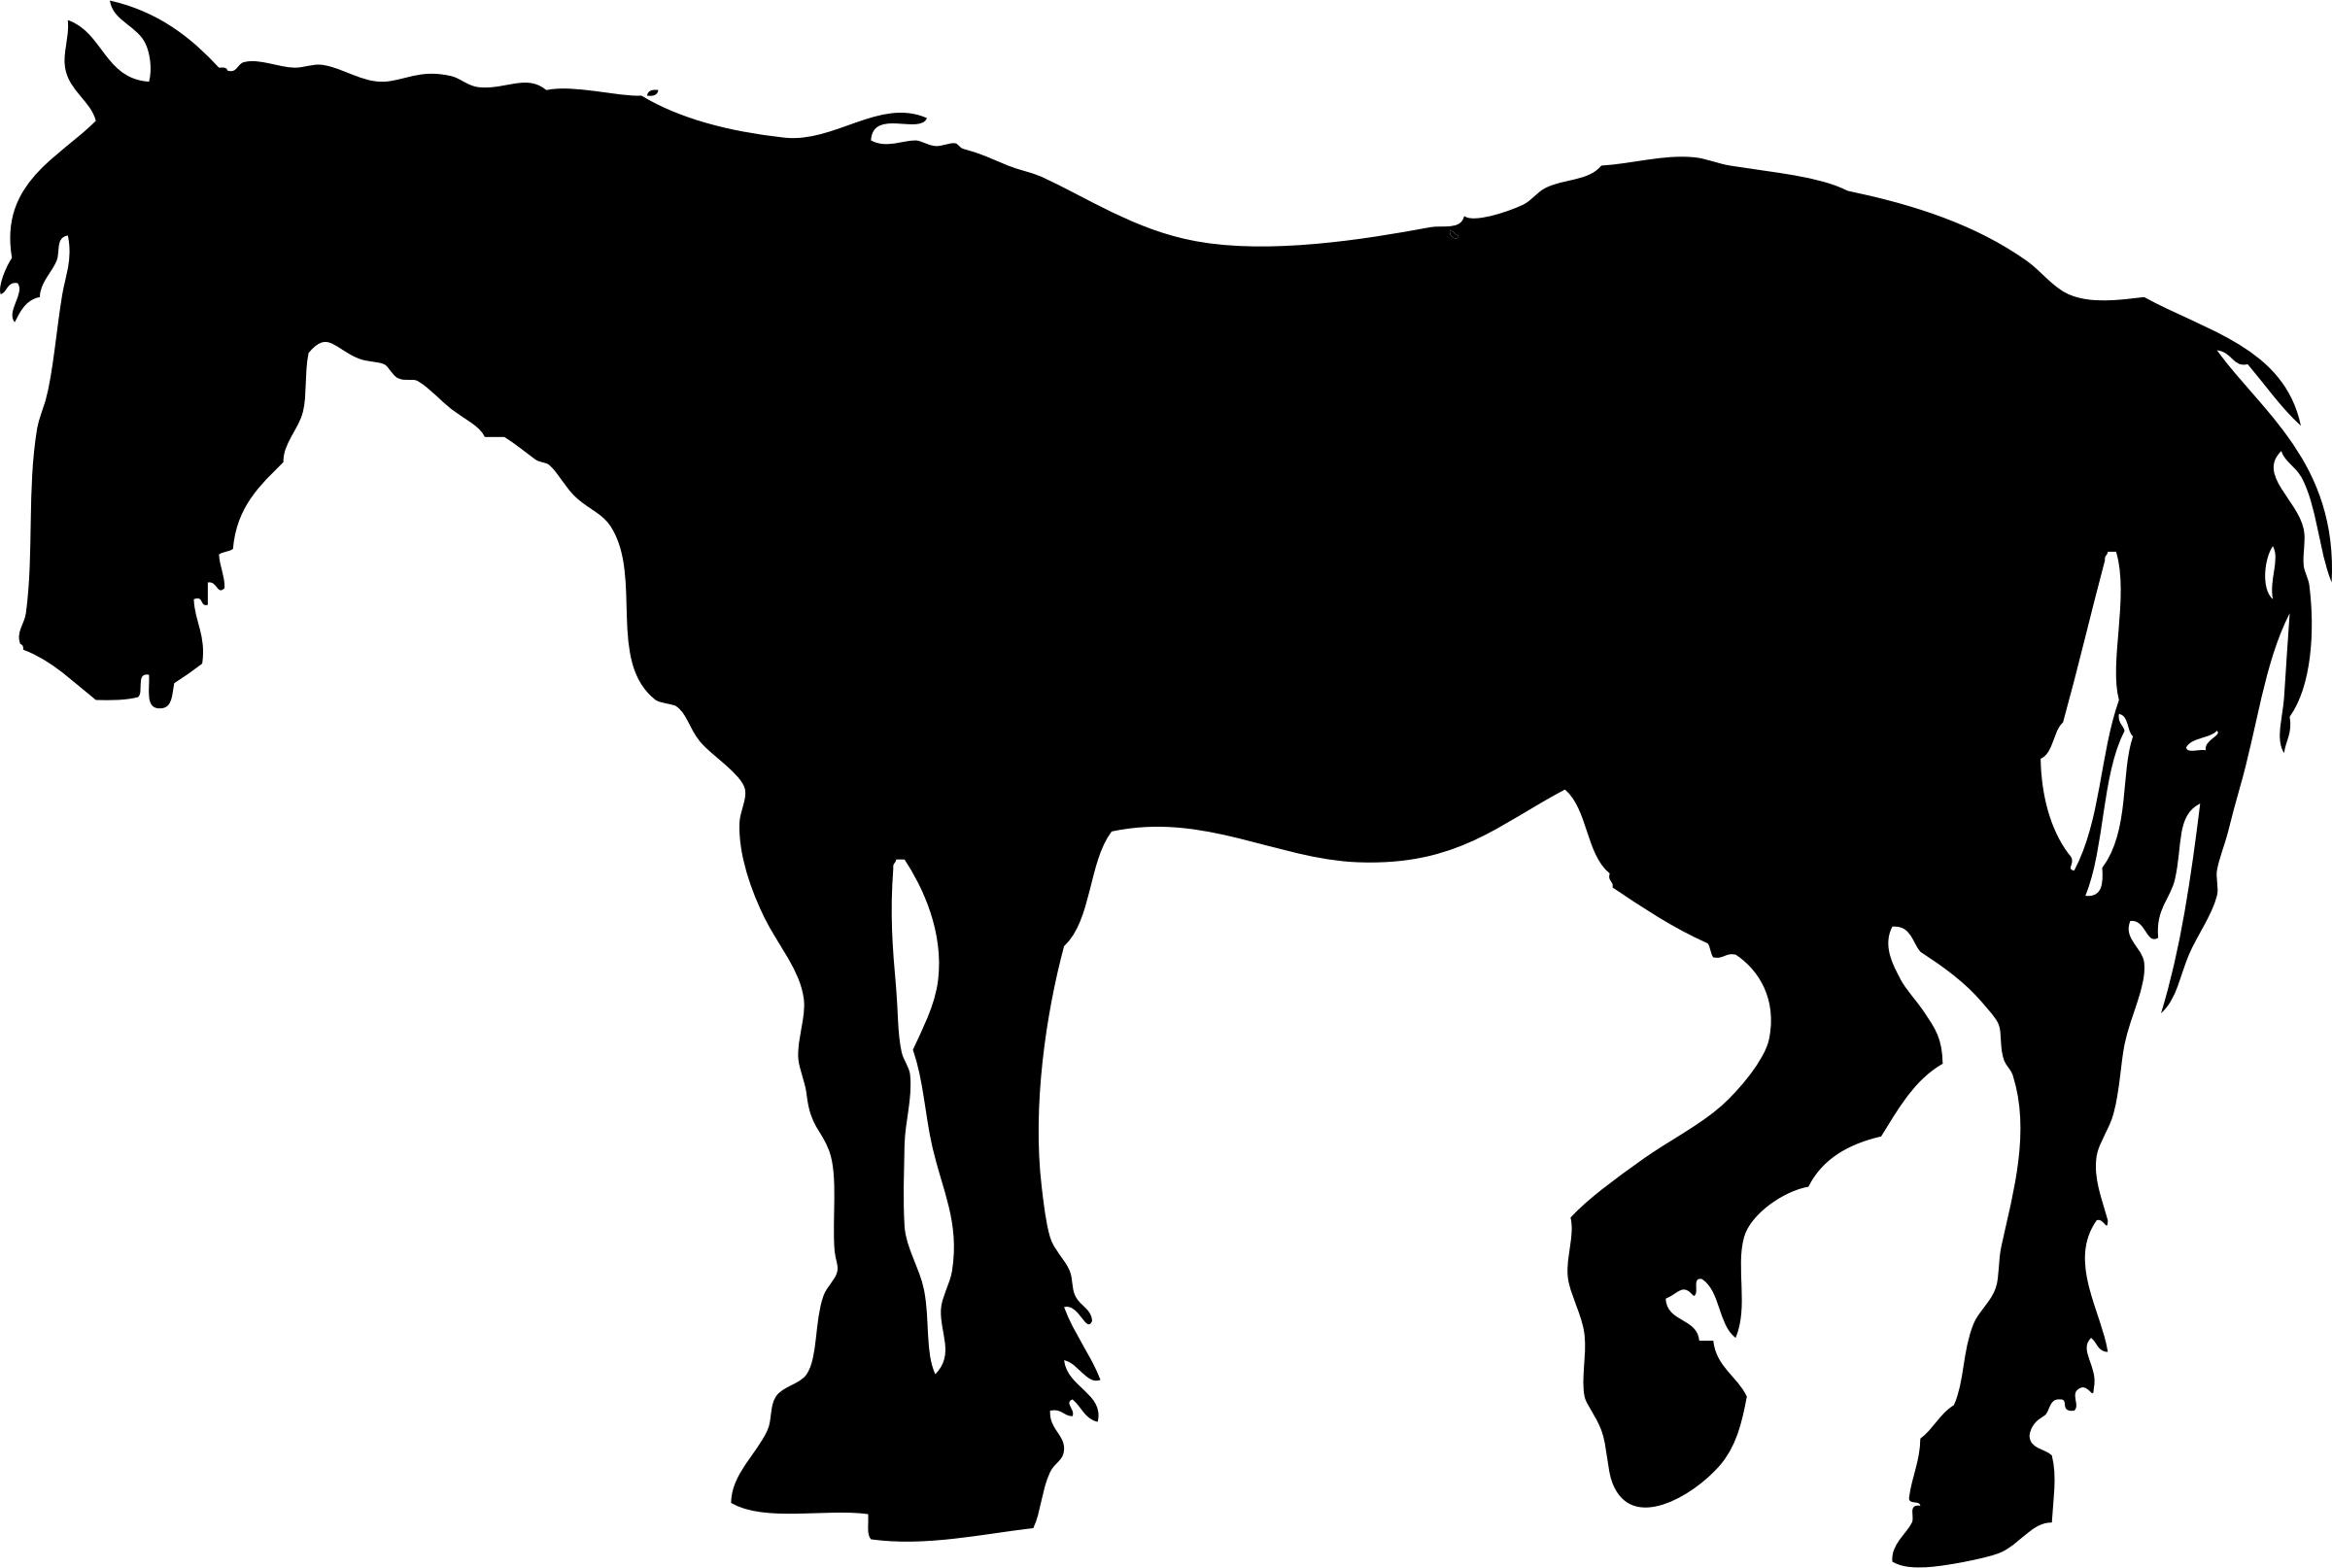 Horse silhouette PNG icons